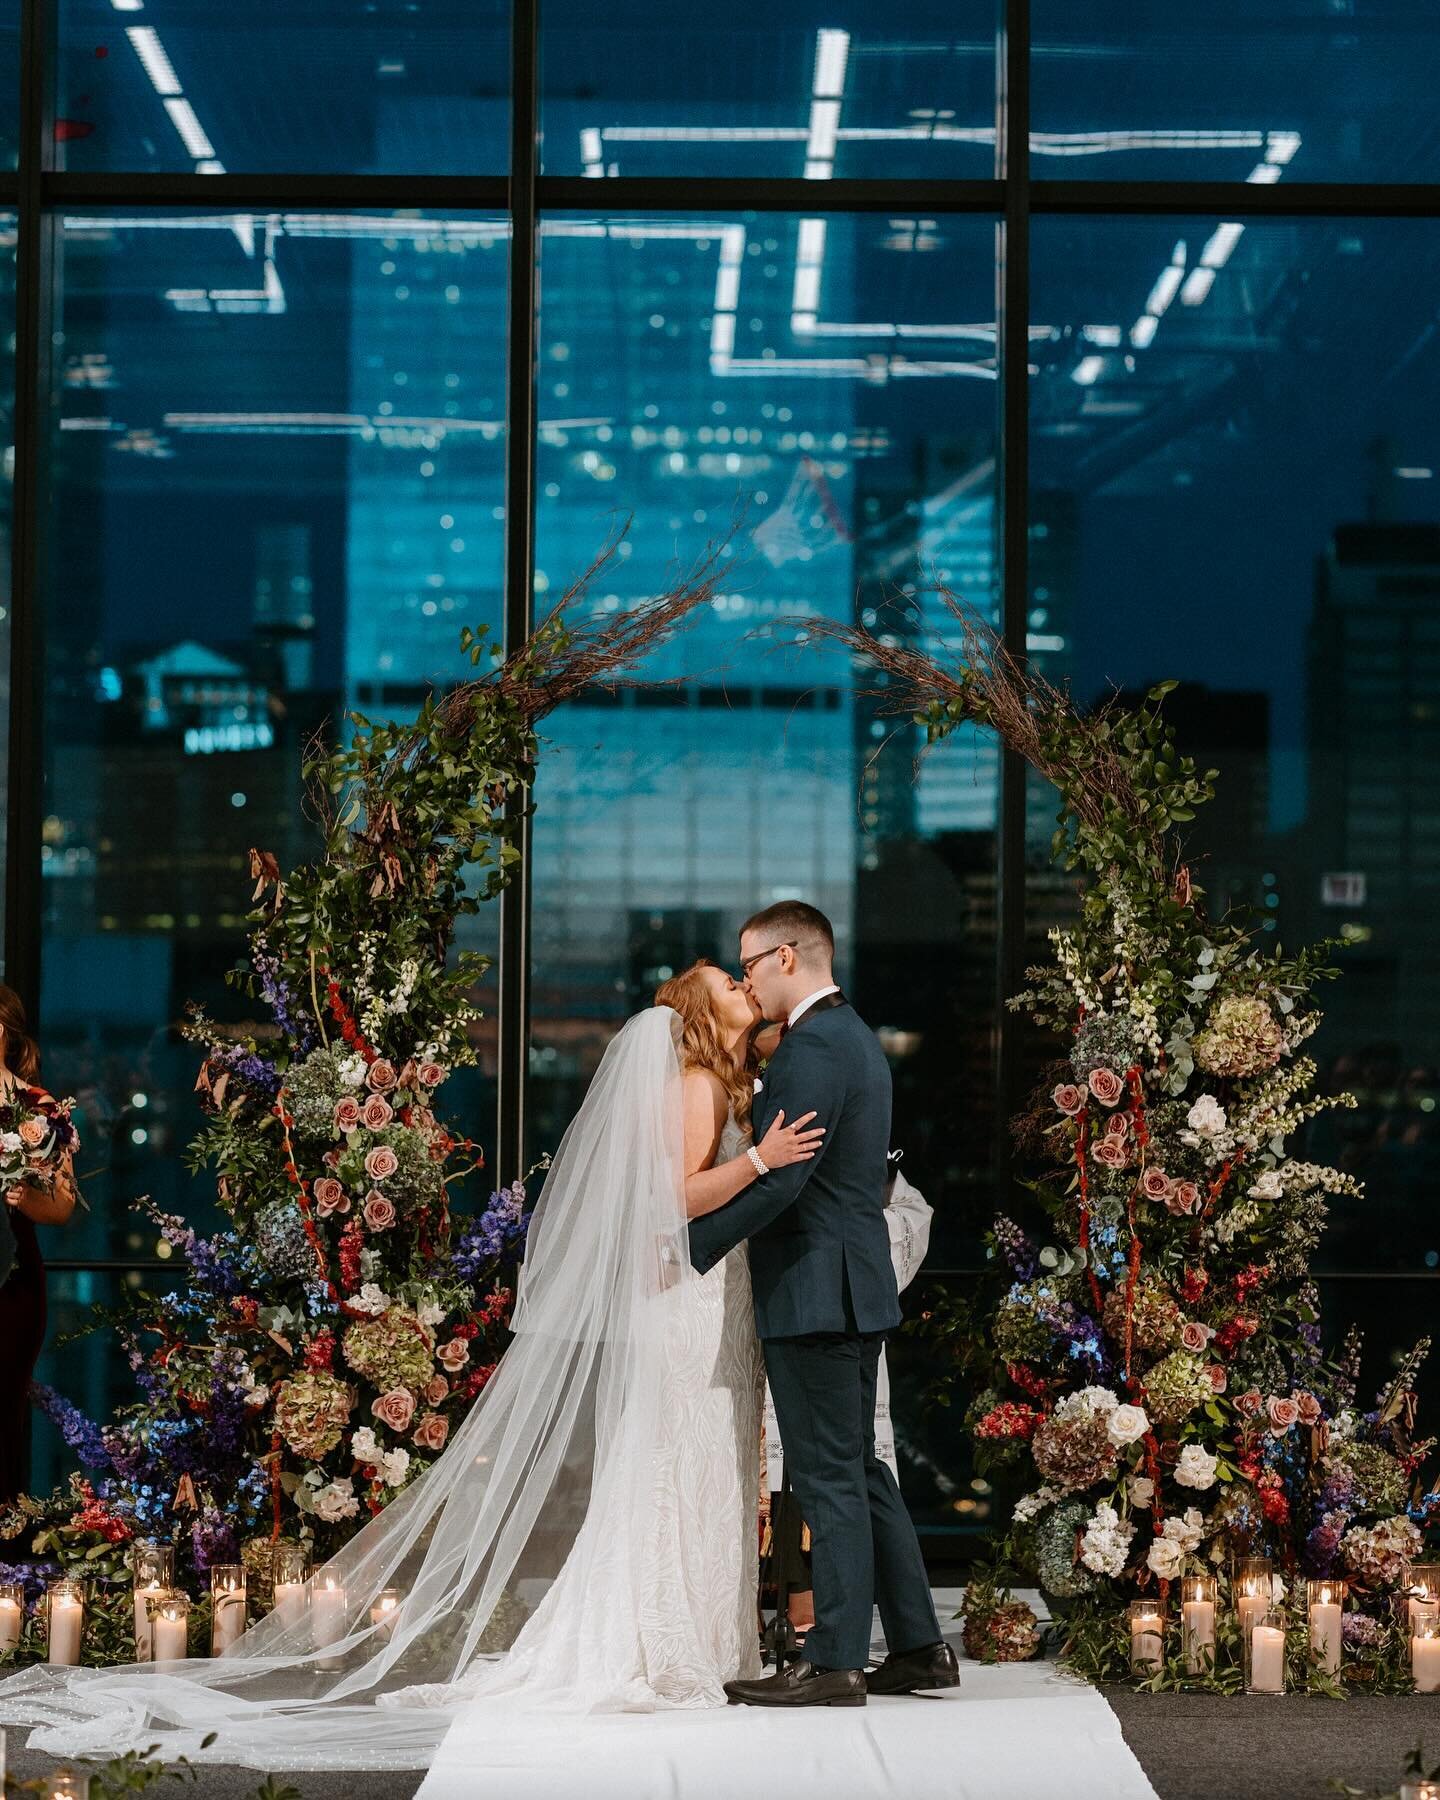 Danielle + Will&rsquo;s STUNNING ✨soir&eacute;e in the sky✨this past weekend was one for the books! 

Noelle served as D+W&rsquo;s full service planner for their wedding weekend, and boy did she have the best time dreaming up this day with them. Betw